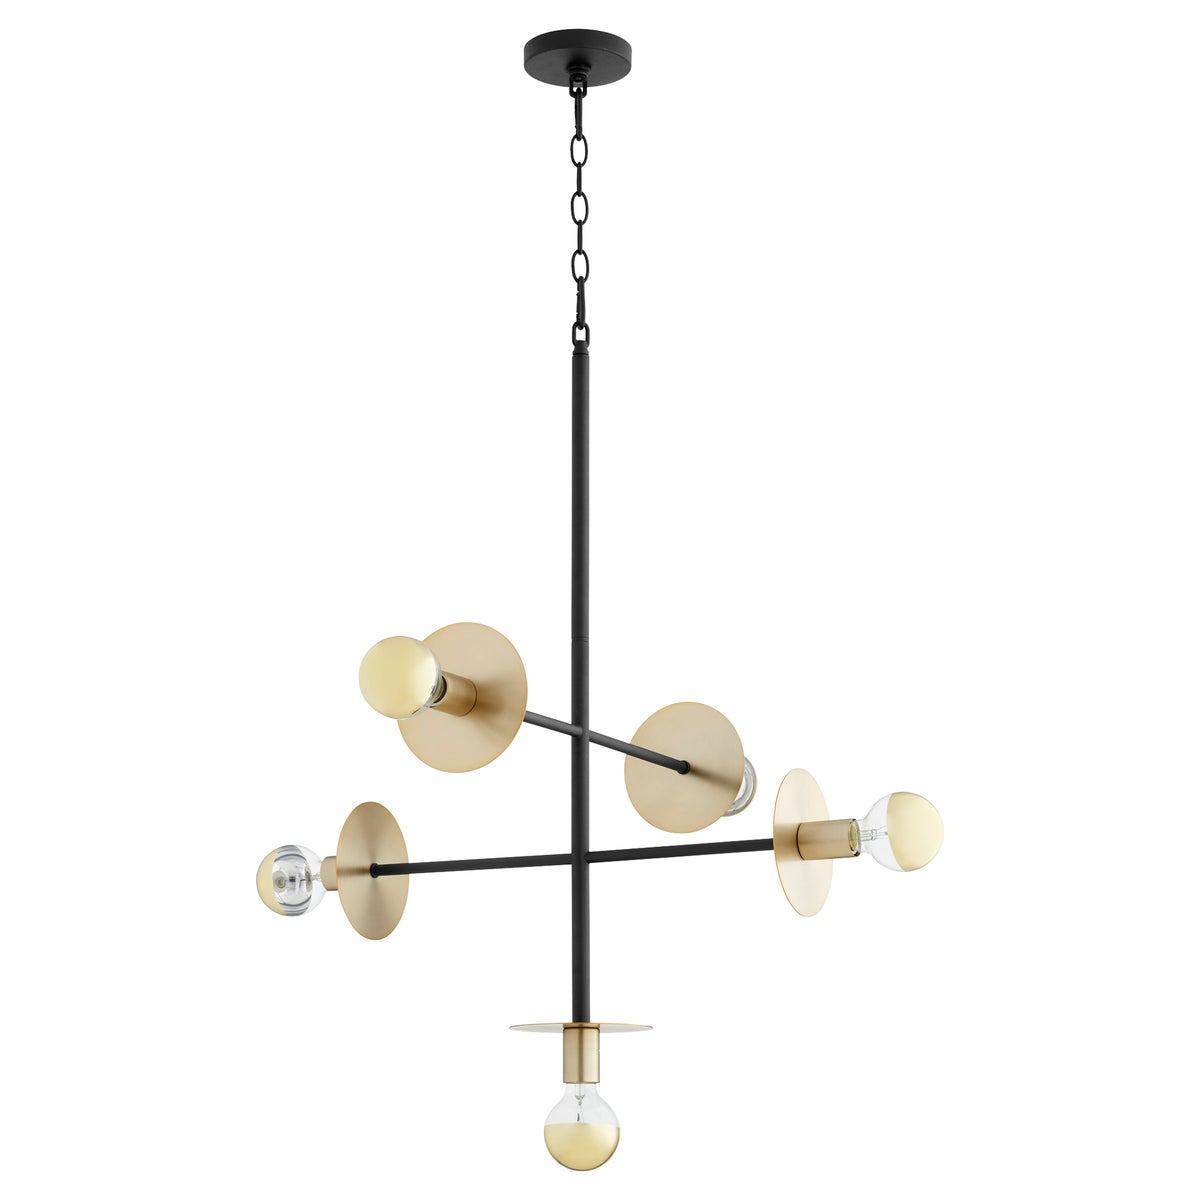 Contemporary pendant light with gold circles and light bulbs, providing multi-directional radiance. Two-toned design in noir and aged brass finishes. Damp Listed for indoor/outdoor installation. 18.5"W x 24"H.